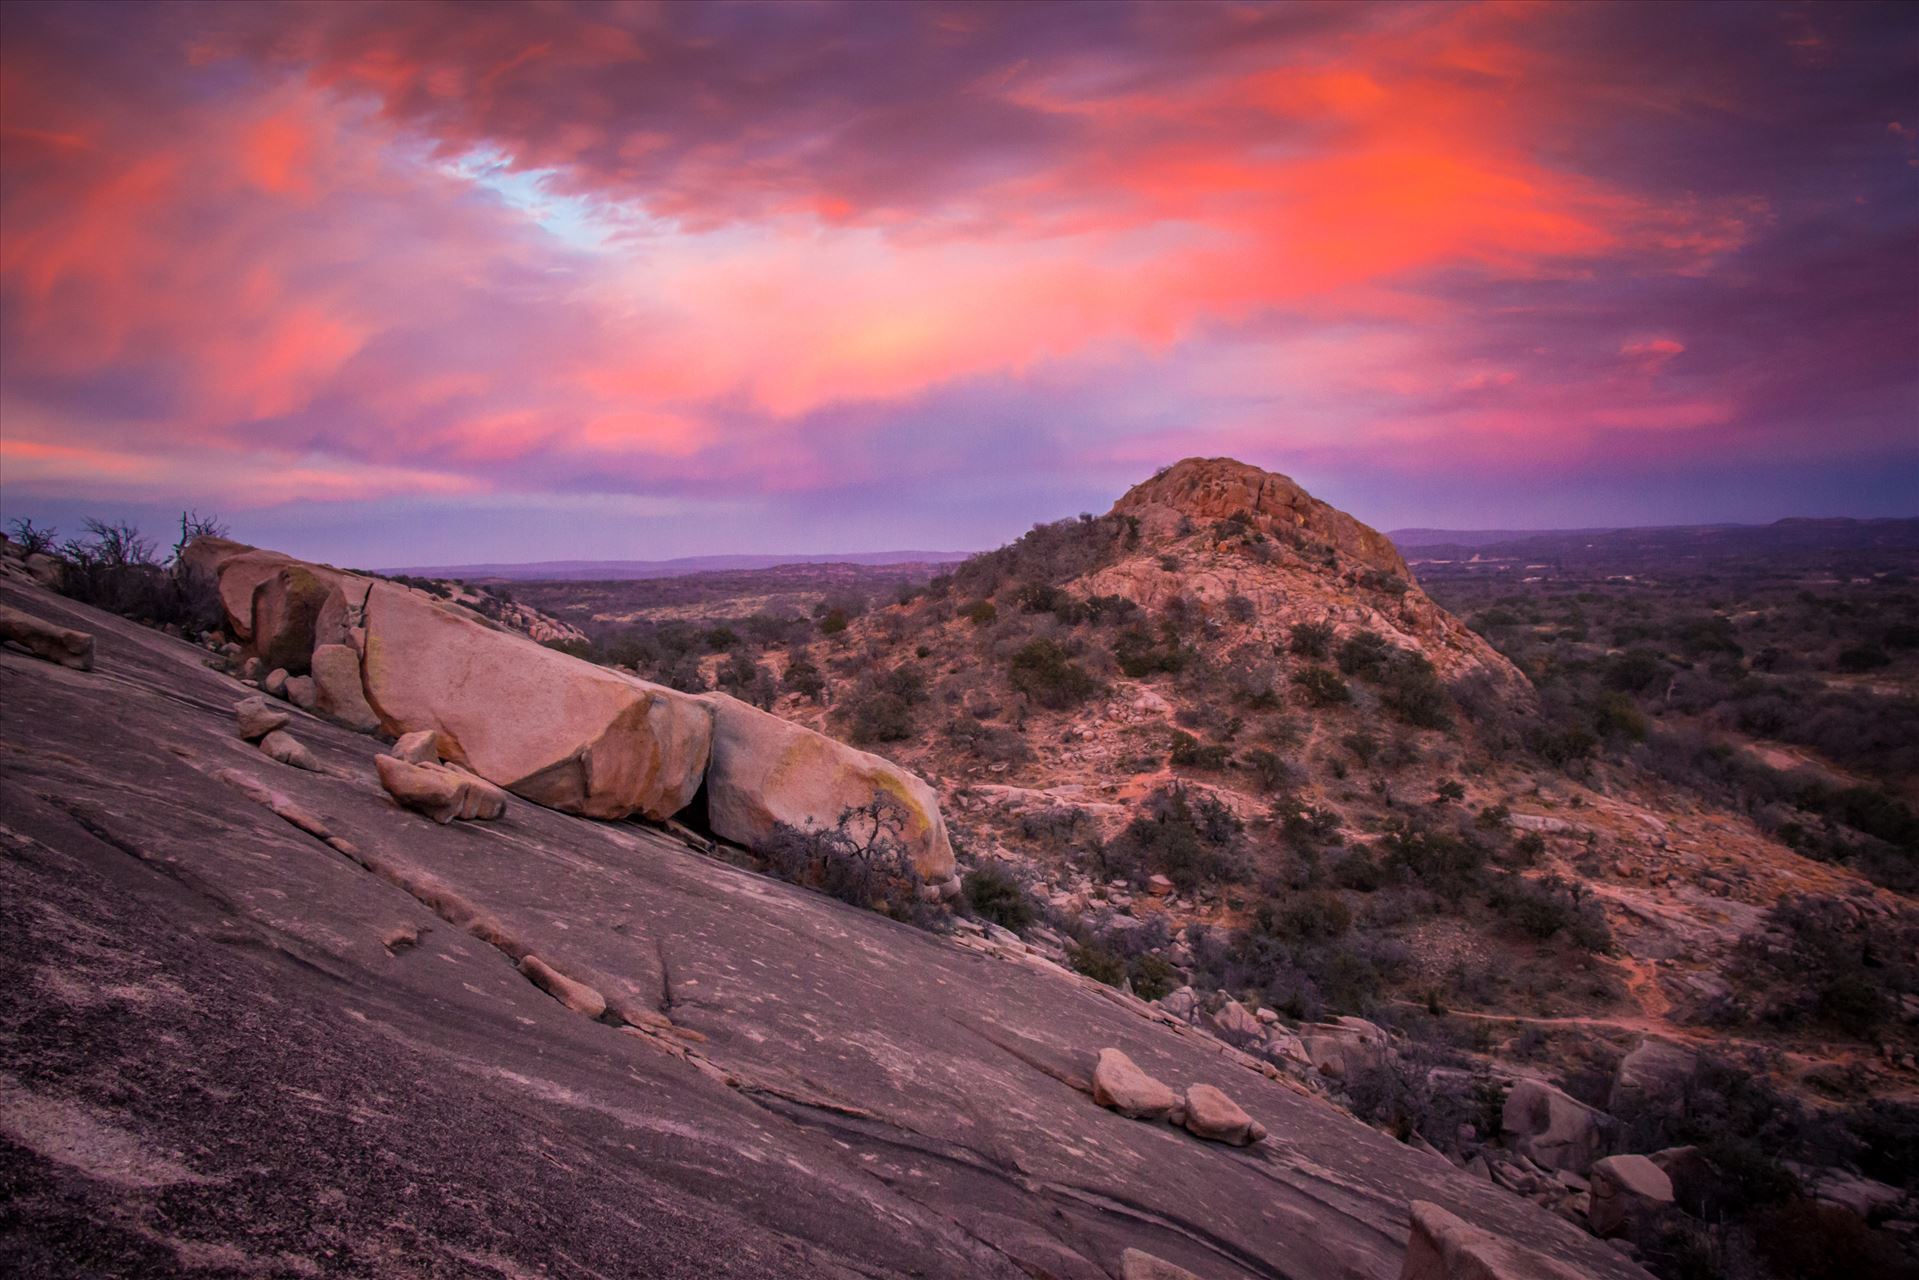 20140112-Enchanted Rock-DSLR-077.jpg  by Charles Smith Photography